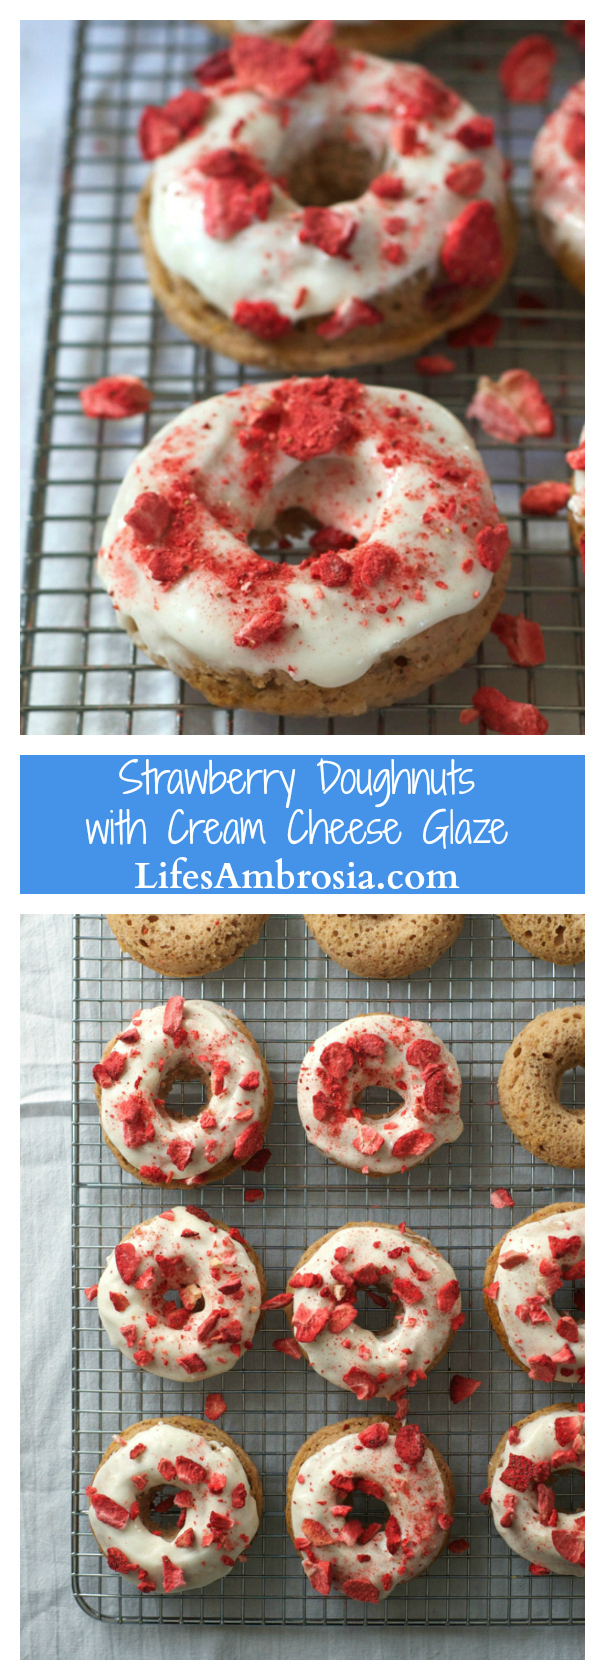 Baked strawberry doughnuts with cream cheese glaze are the perfect sweet treat to start your day!